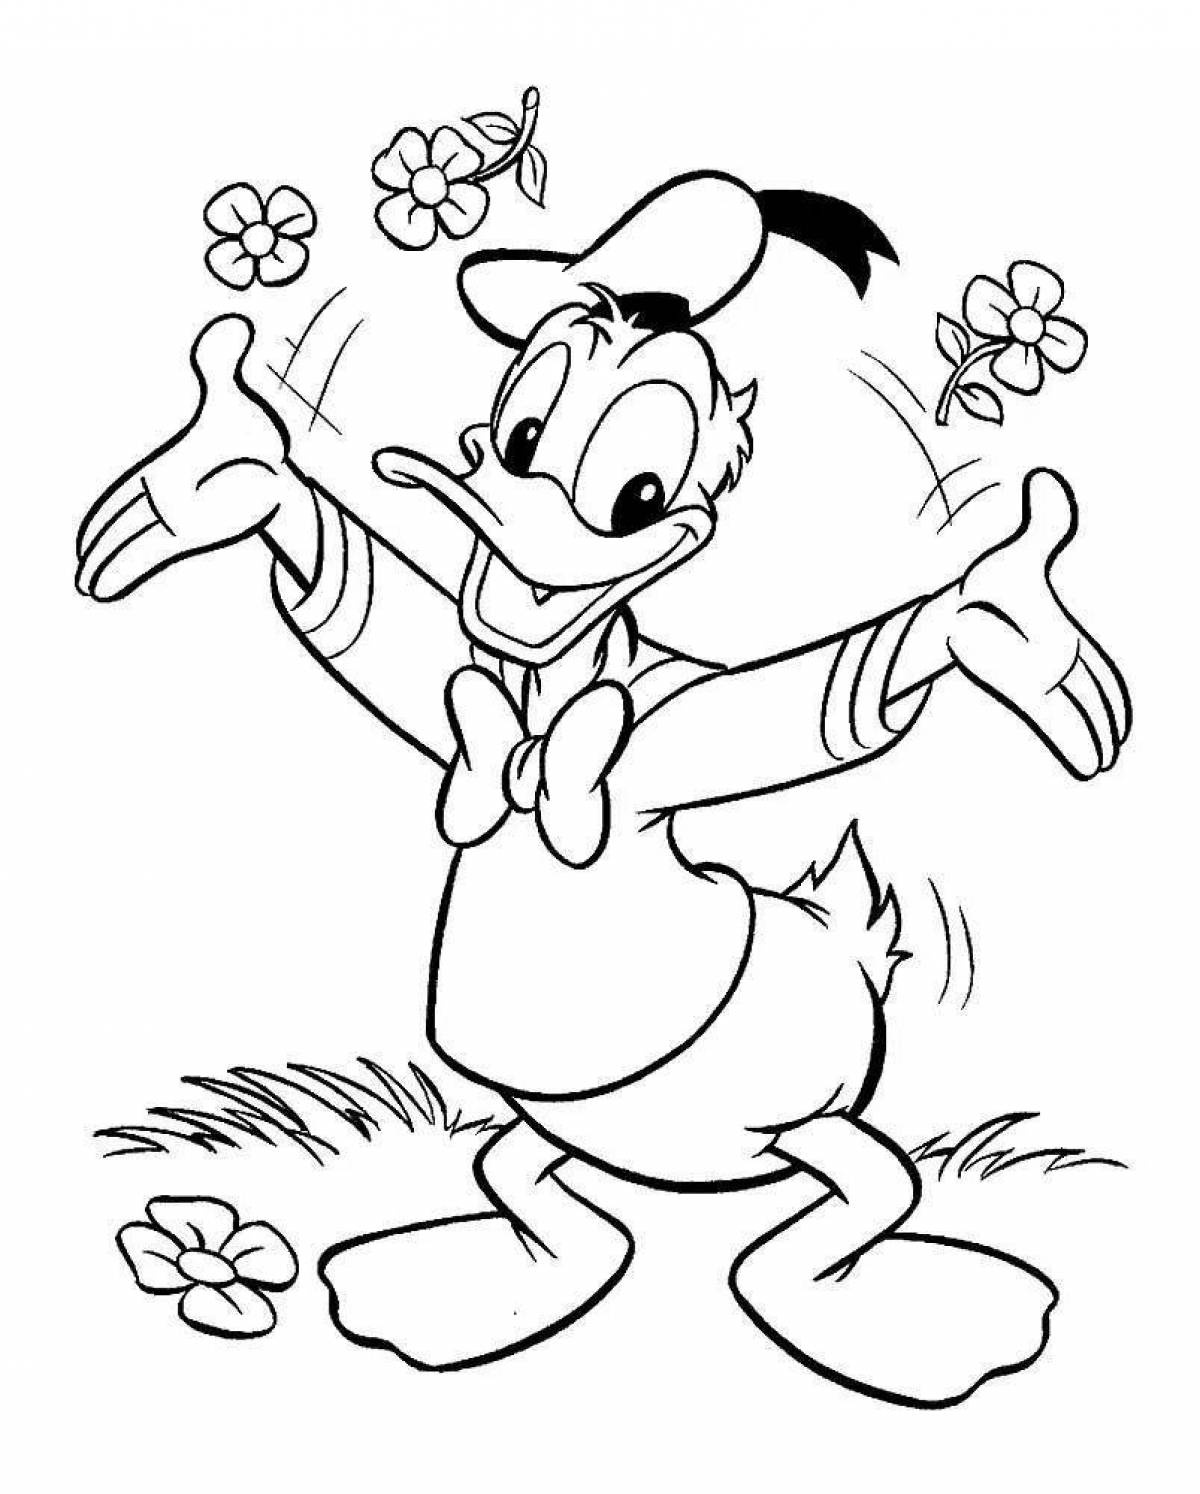 Coloring page of outstanding cartoon characters for 4-5 year olds